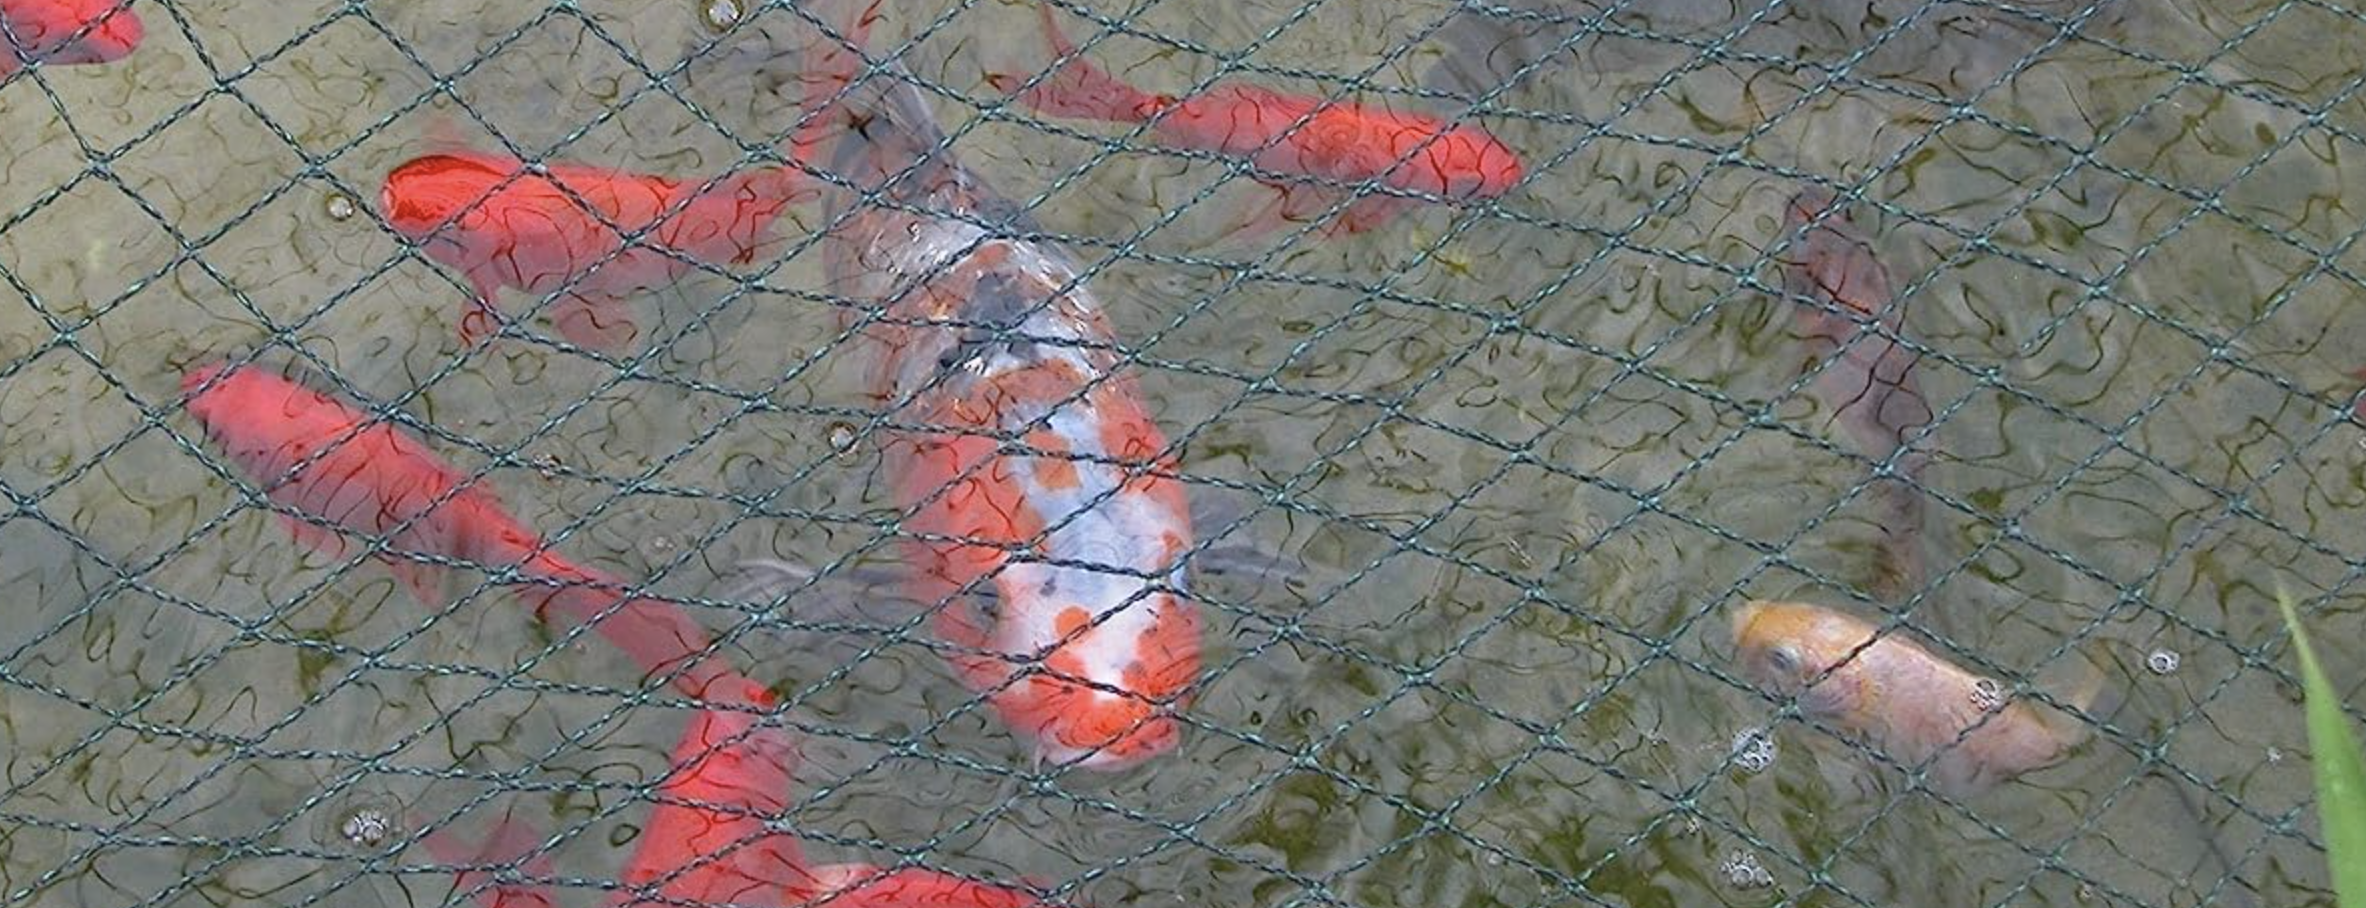 Photo of koi fish in a pond with netting